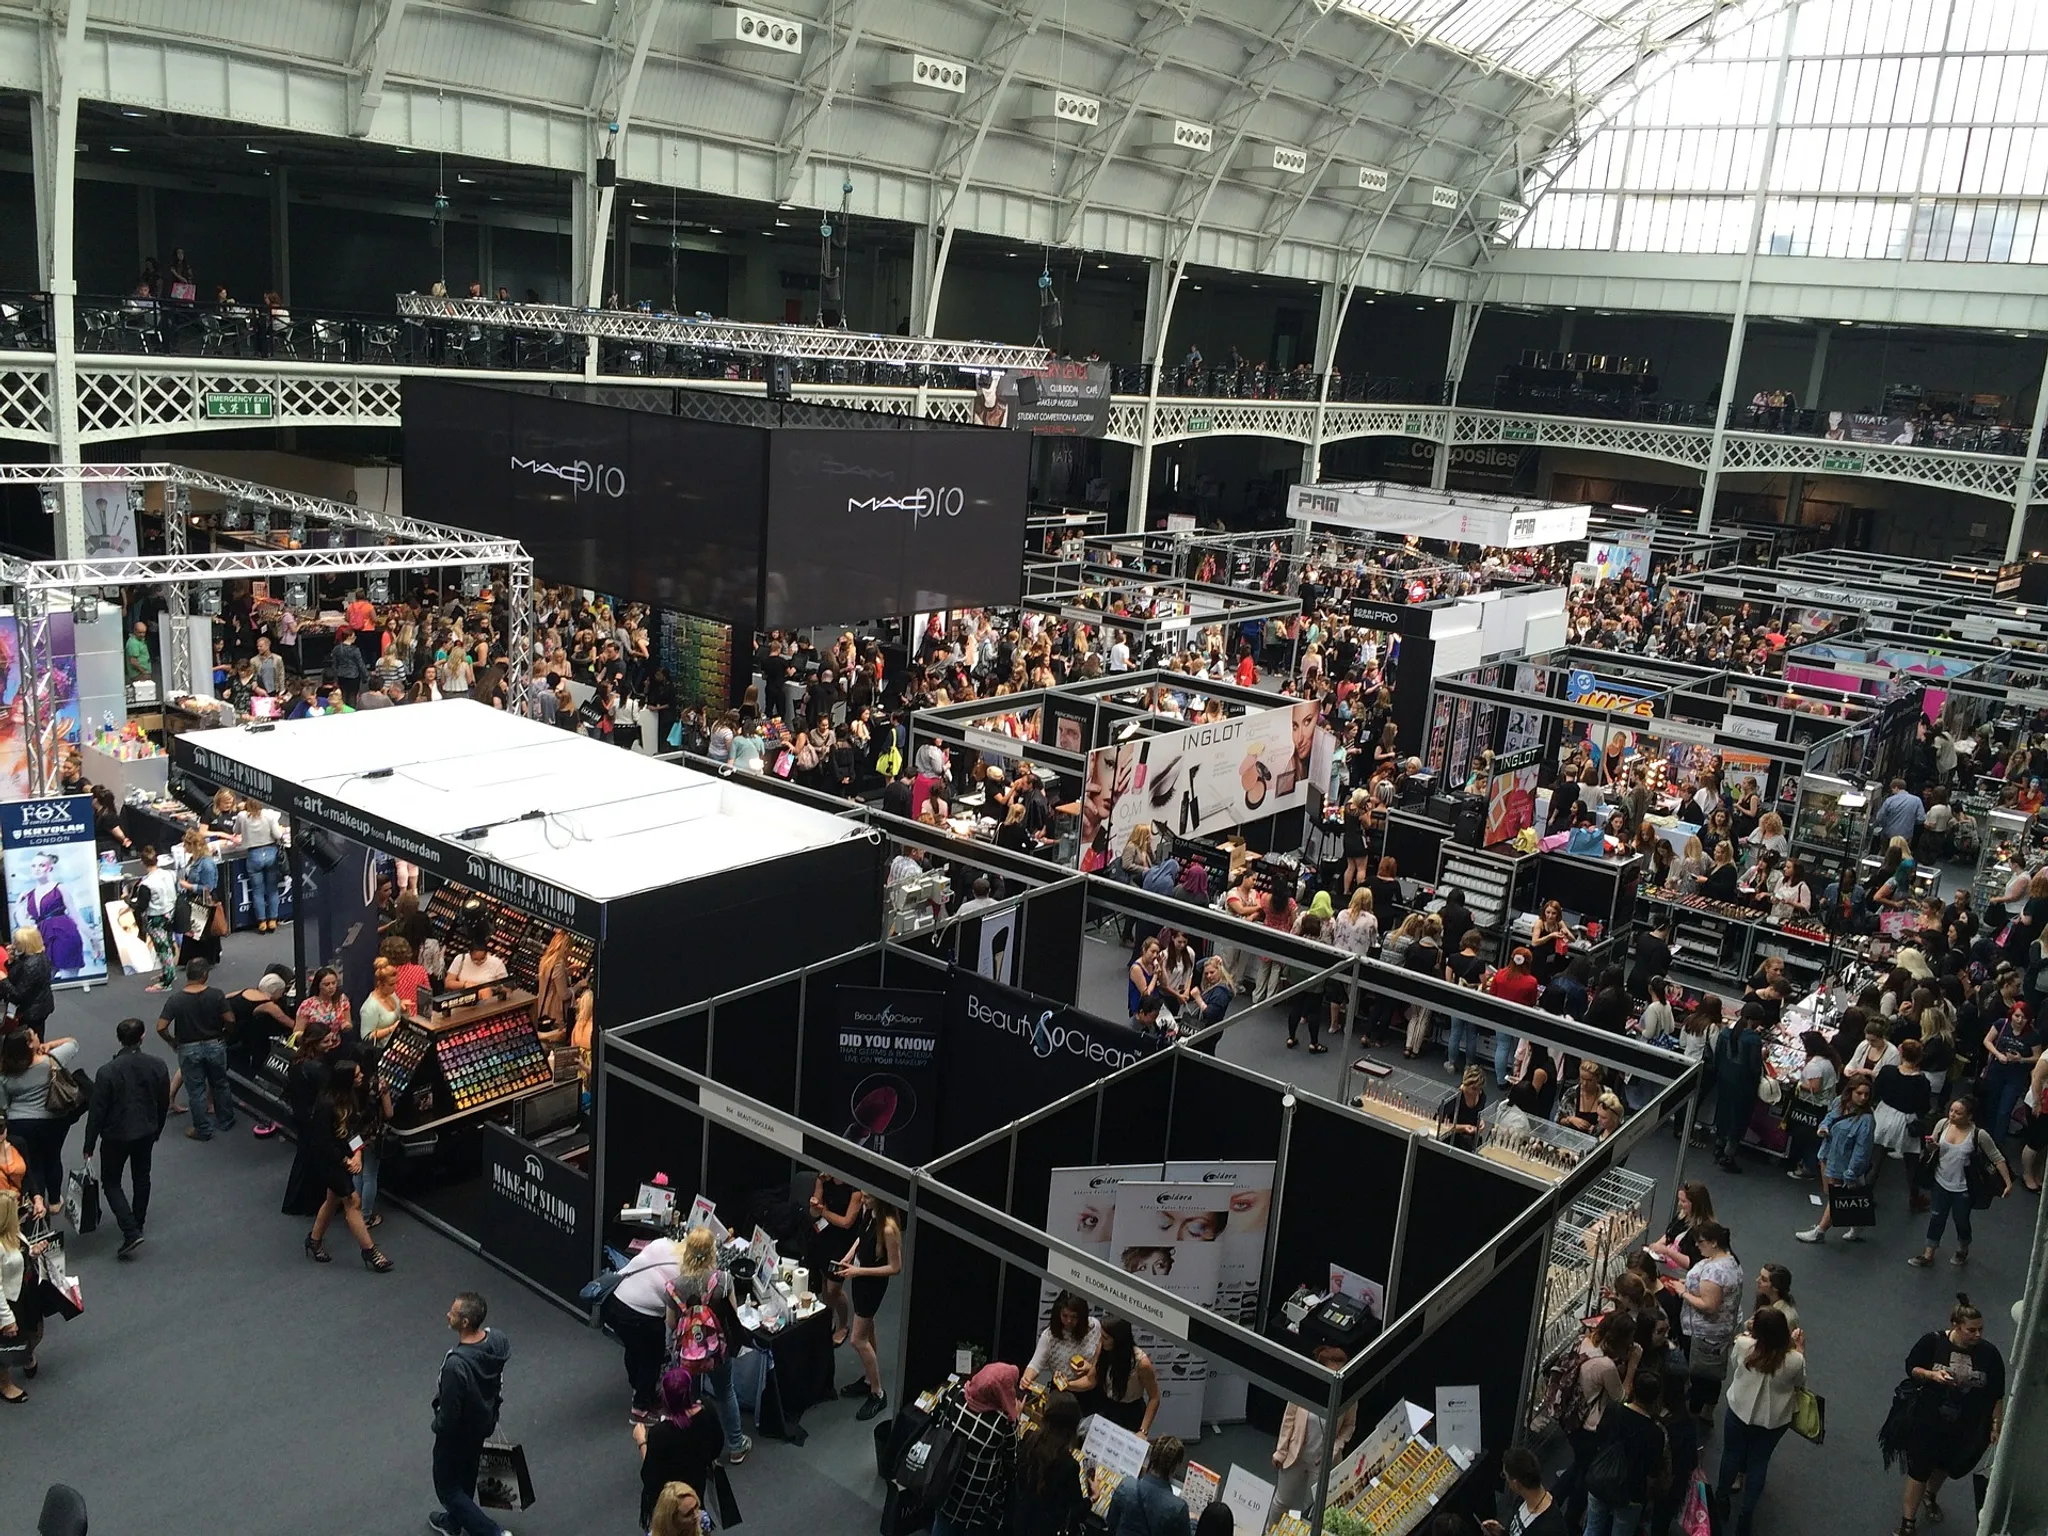 4 selling tips to win business at trade shows